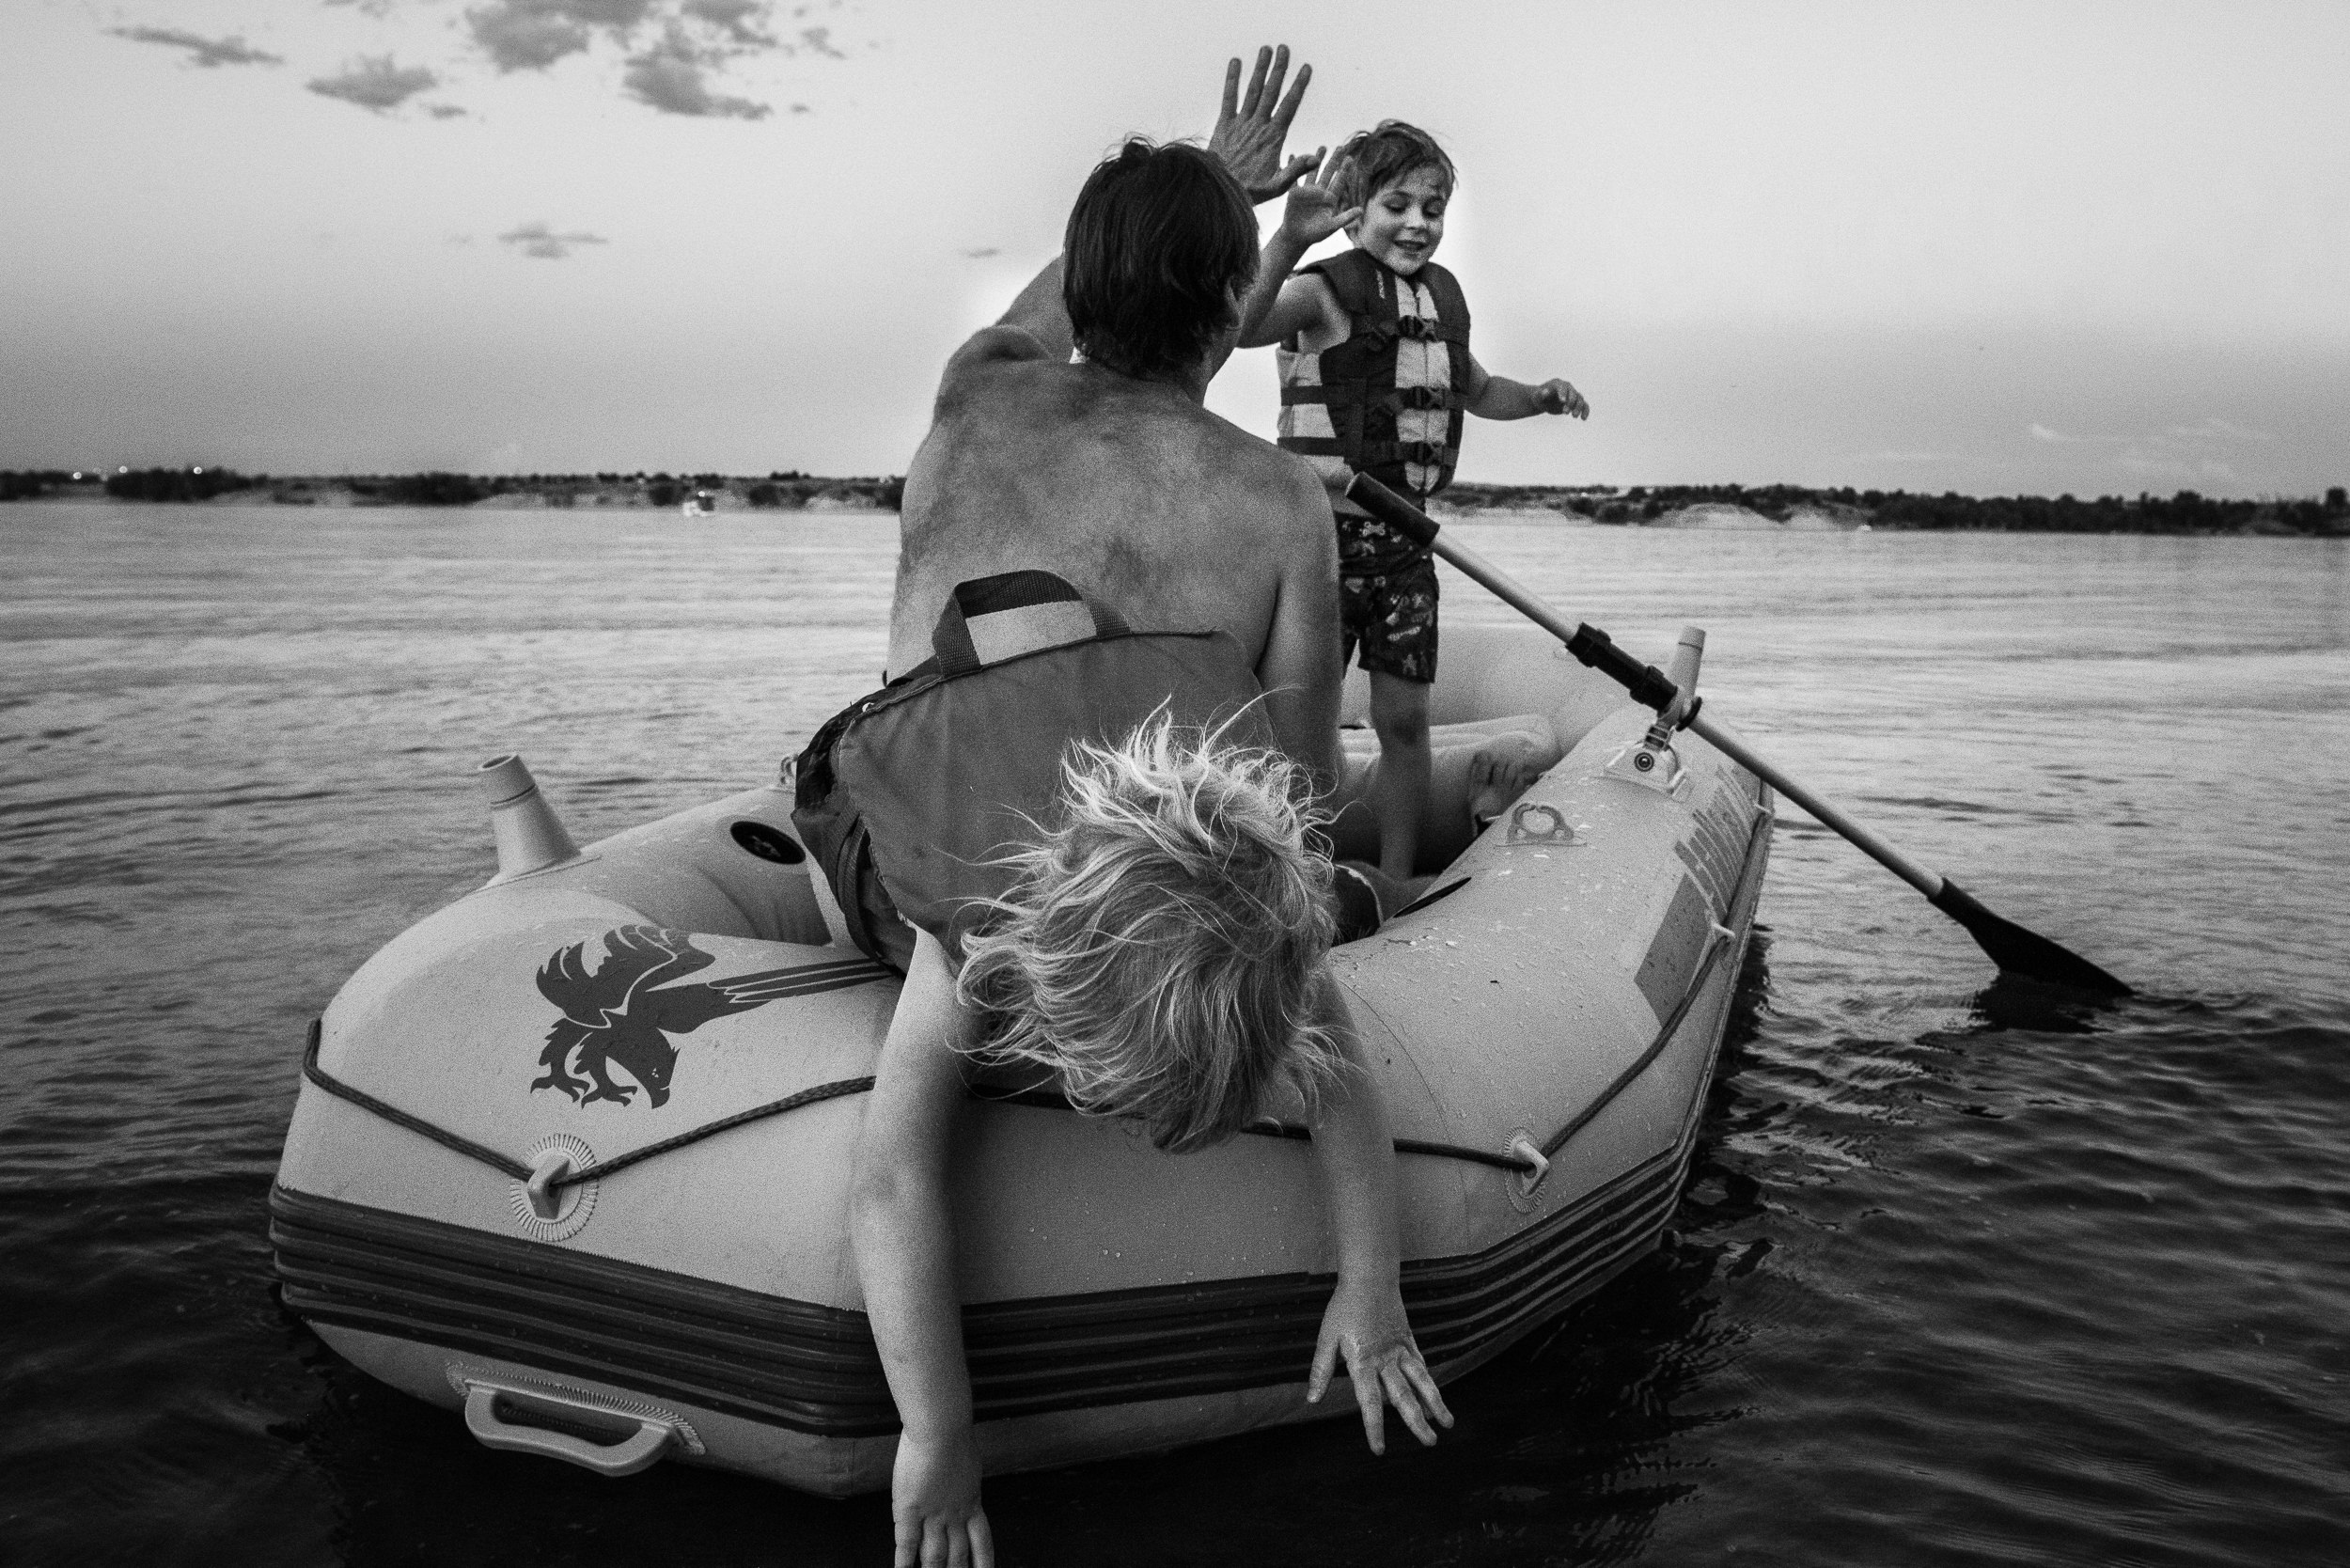 Blog - The Pen & Camera - Molly Rees Photo - Black and White Documentary Childhood Photography - children in raft giving high-five at Chatfield Reservoir in Denver, Colorado by M. Menschel